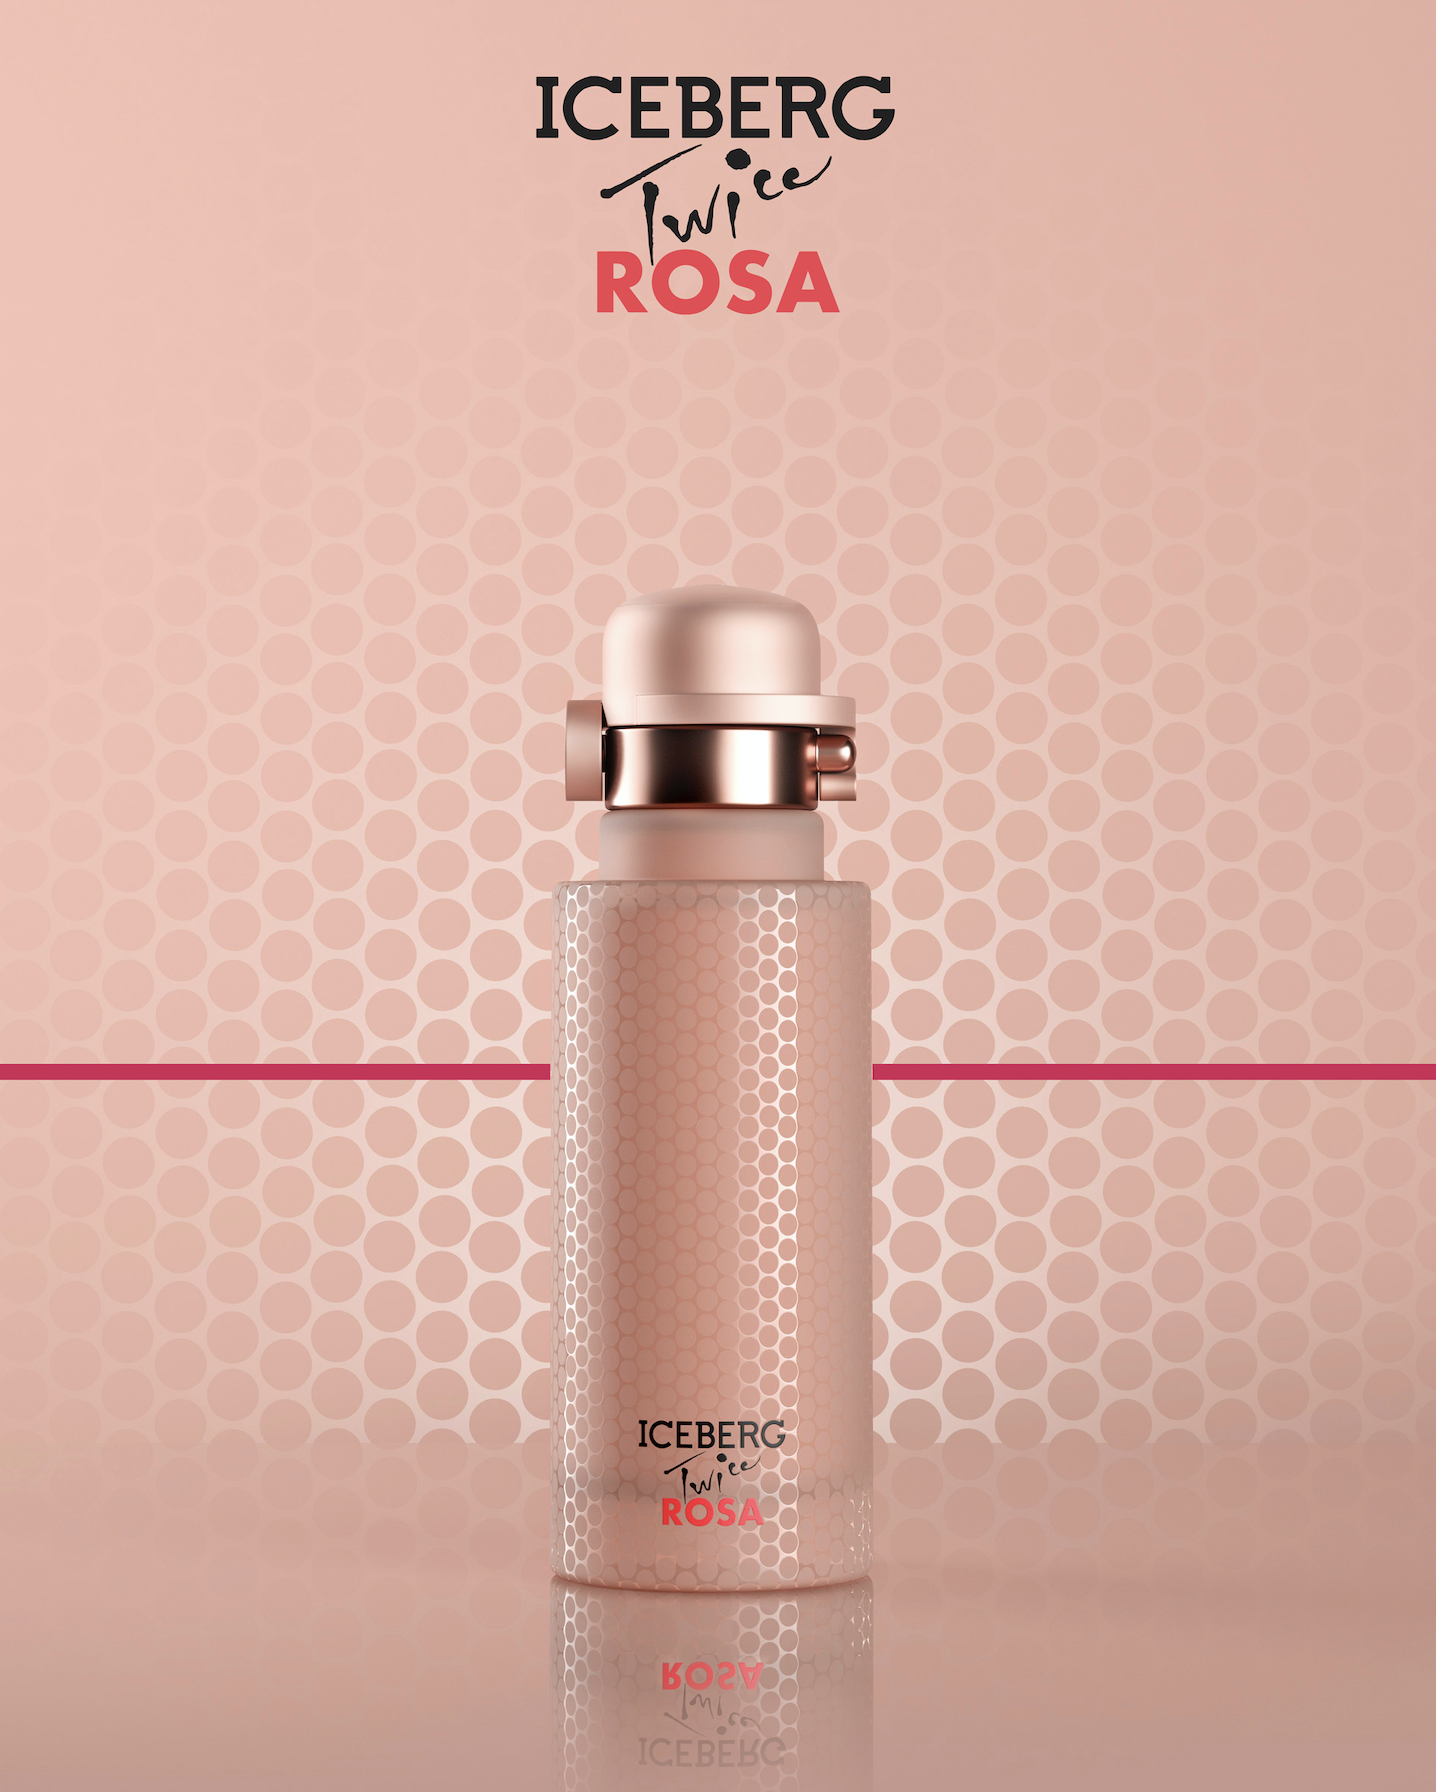 New Sportscents by Iceberg: Twice Rosa and Nero ~ New Fragrances